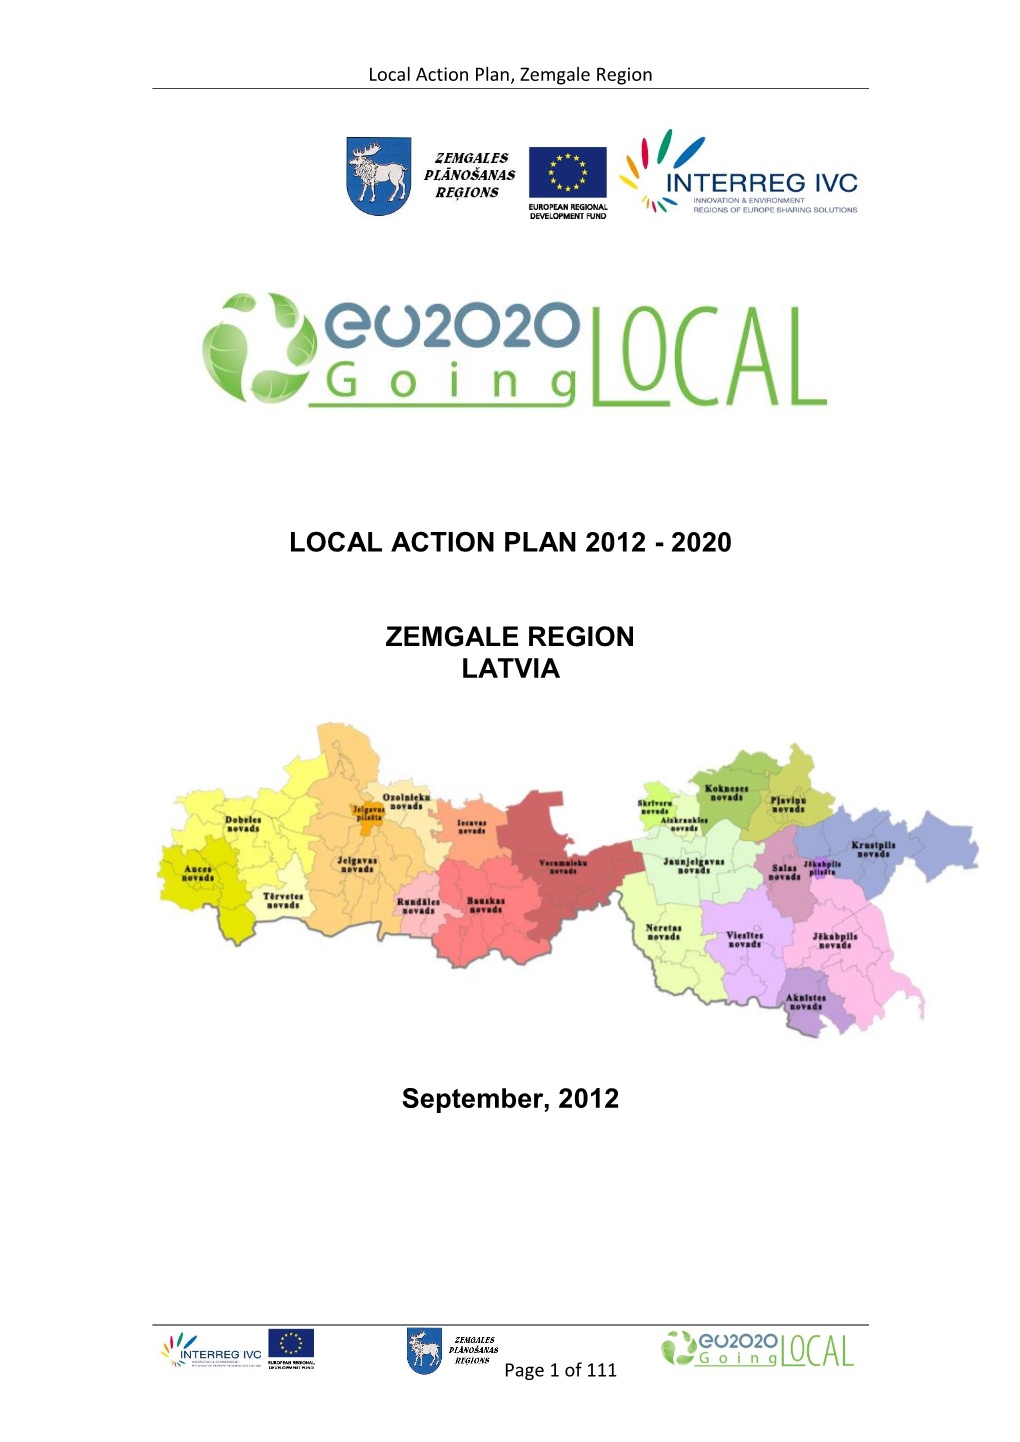 Local Action Plan 2012 - 2020